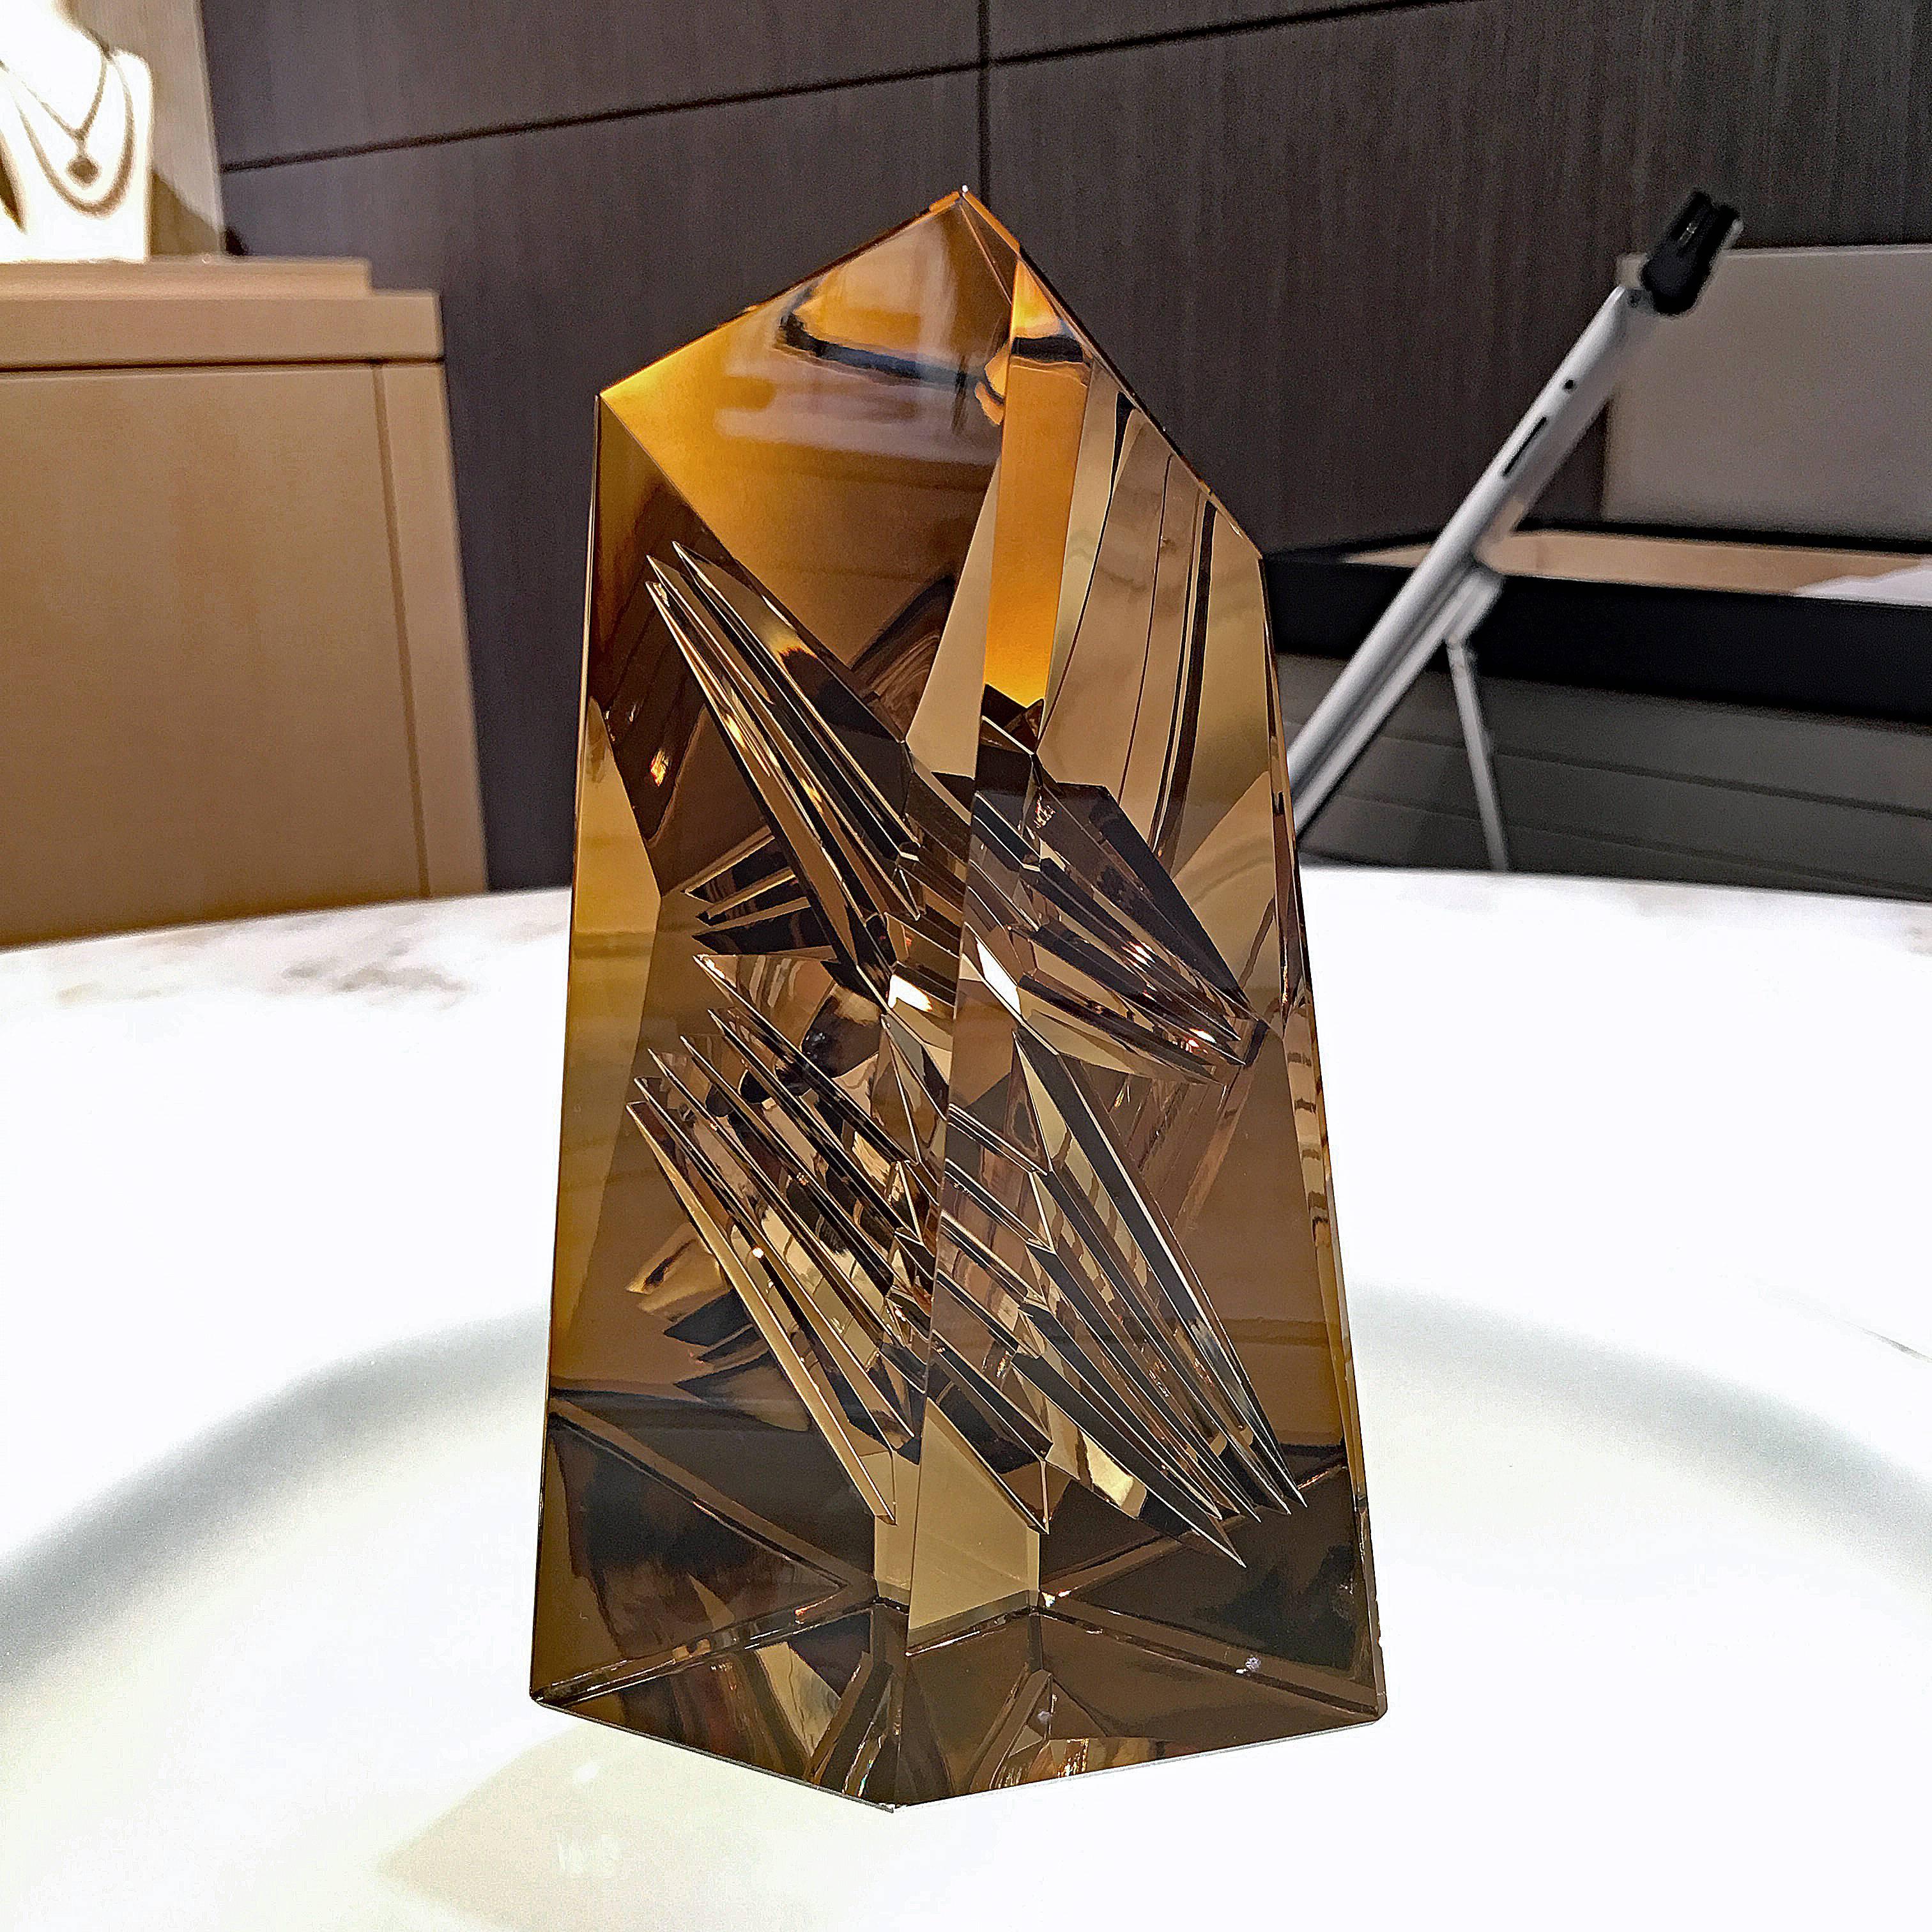 One of a Kind Sculpture featuring a massive 4,233.0 carat citrine gemstone masterfully hand-cut in Germany by the Picasso of Gemstones Atelier Munsteiner. Comes with Munsteiner Certificate of Authenticity 